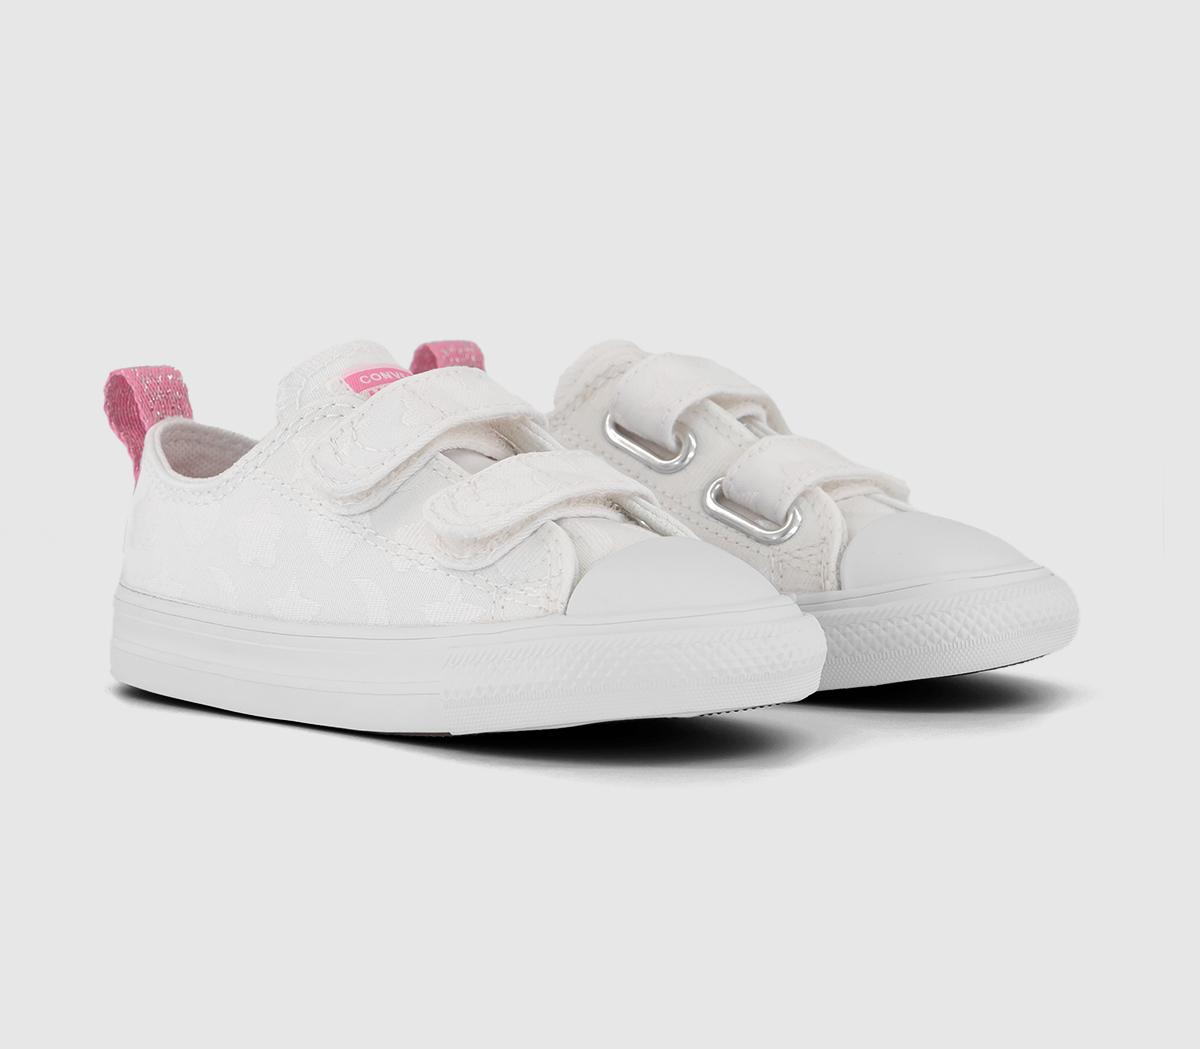 Converse Kids All Star 2vlace Trainers White Oops Pink, 8infant